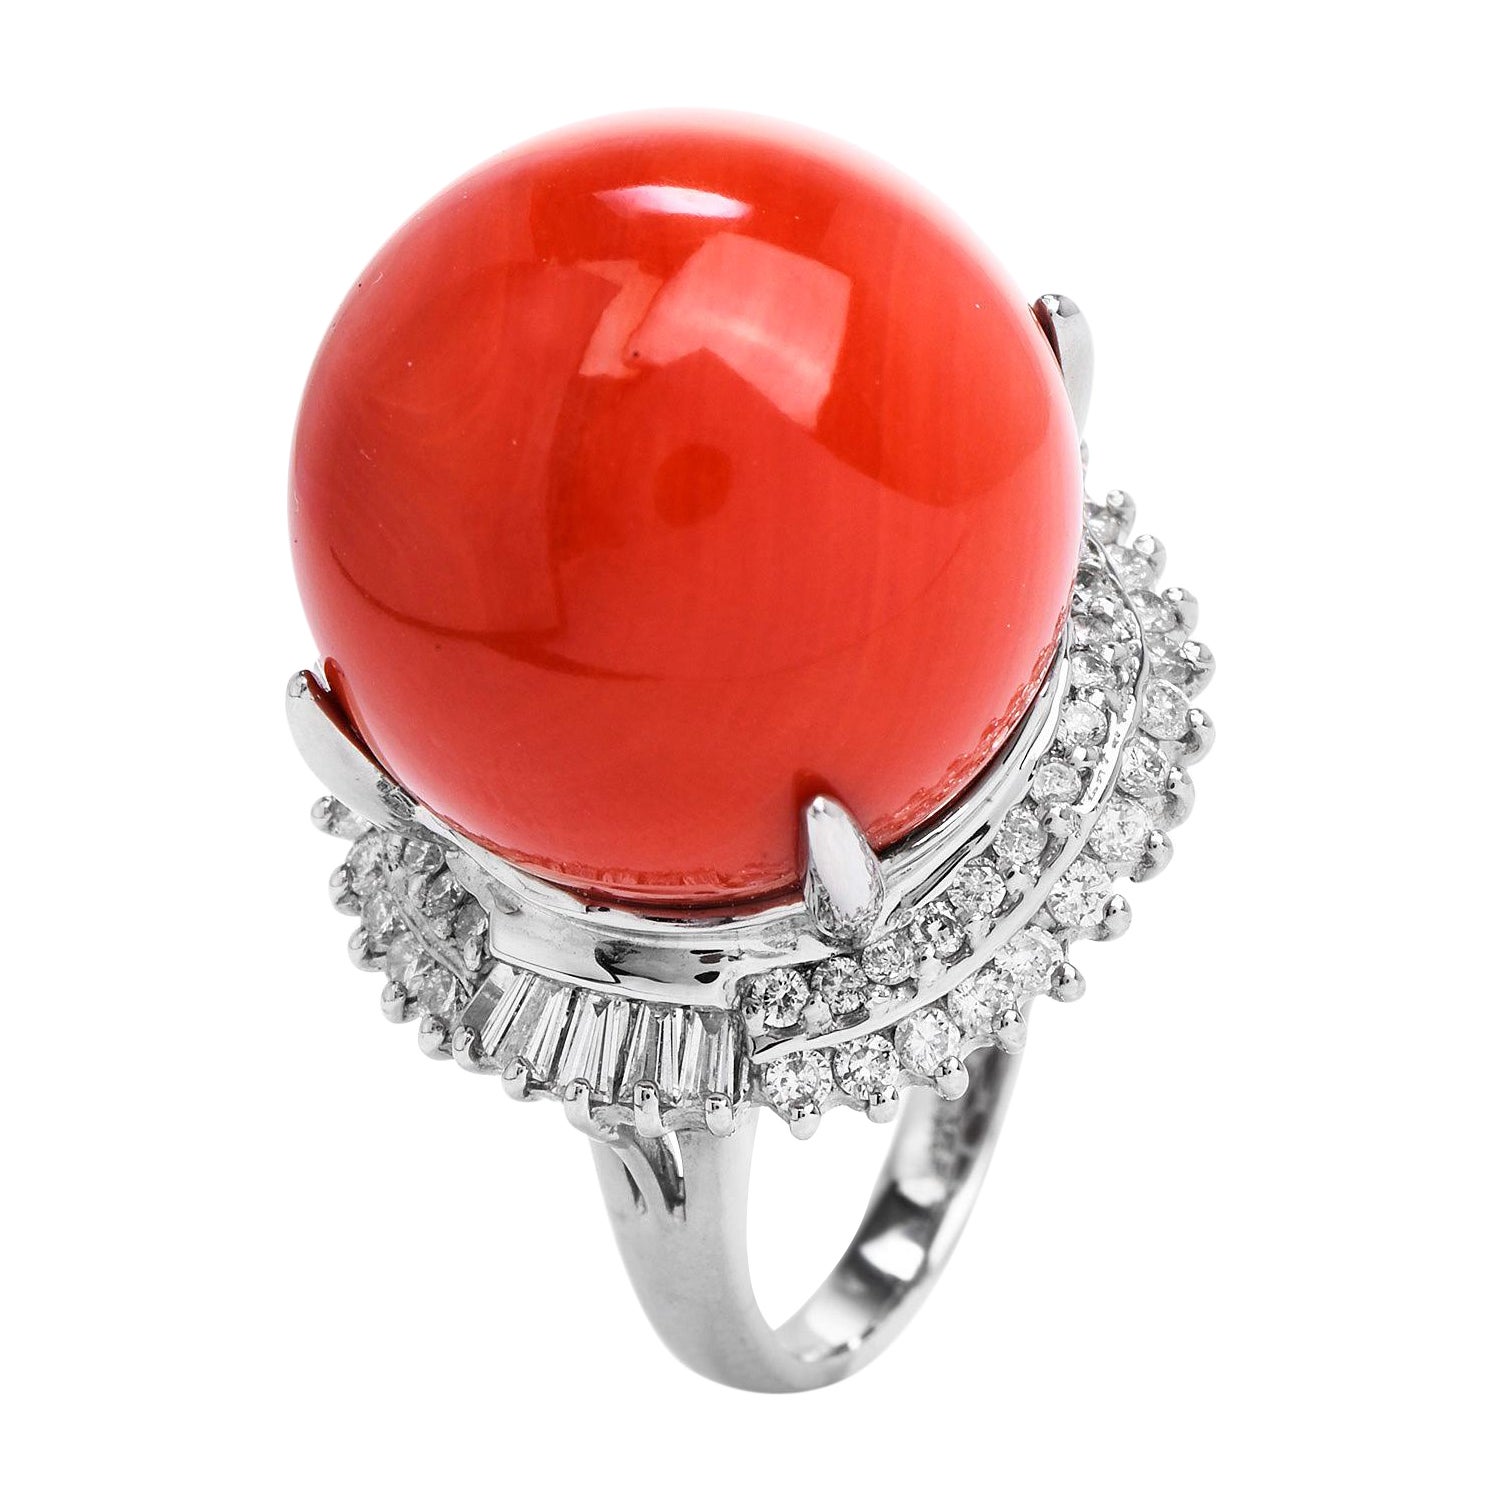 This high-quality natural red coral diamond ring is crafted in solid platinum, weighing 18.5 grams and measuring 20mm x 16mm high. Displaying one prominent four-claws prong-set natural coral of salmon-red color measuring 18 mm. Enhanced by a